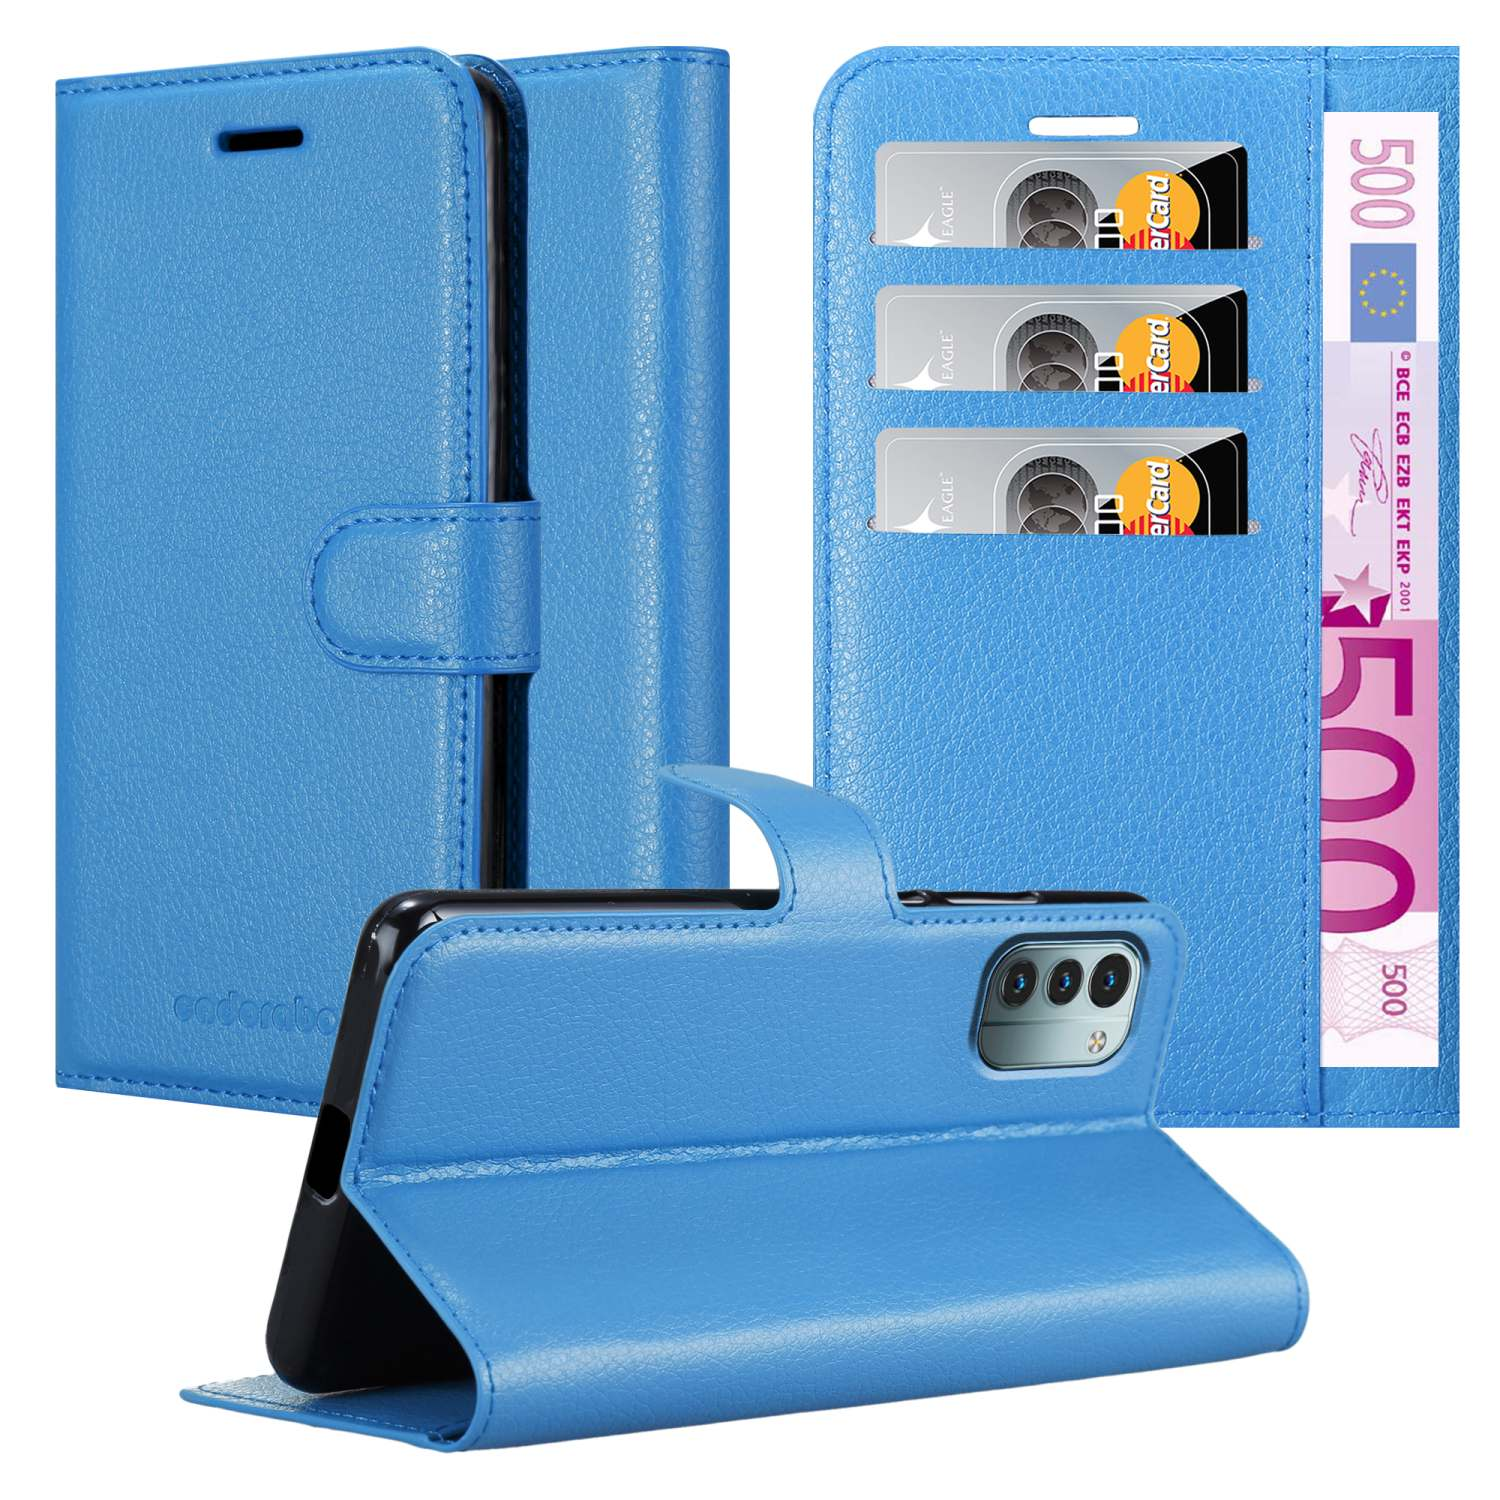 CADORABO Book BLAU Nokia, Hülle Standfunktion, Bookcover, G11 PASTELL G21, 